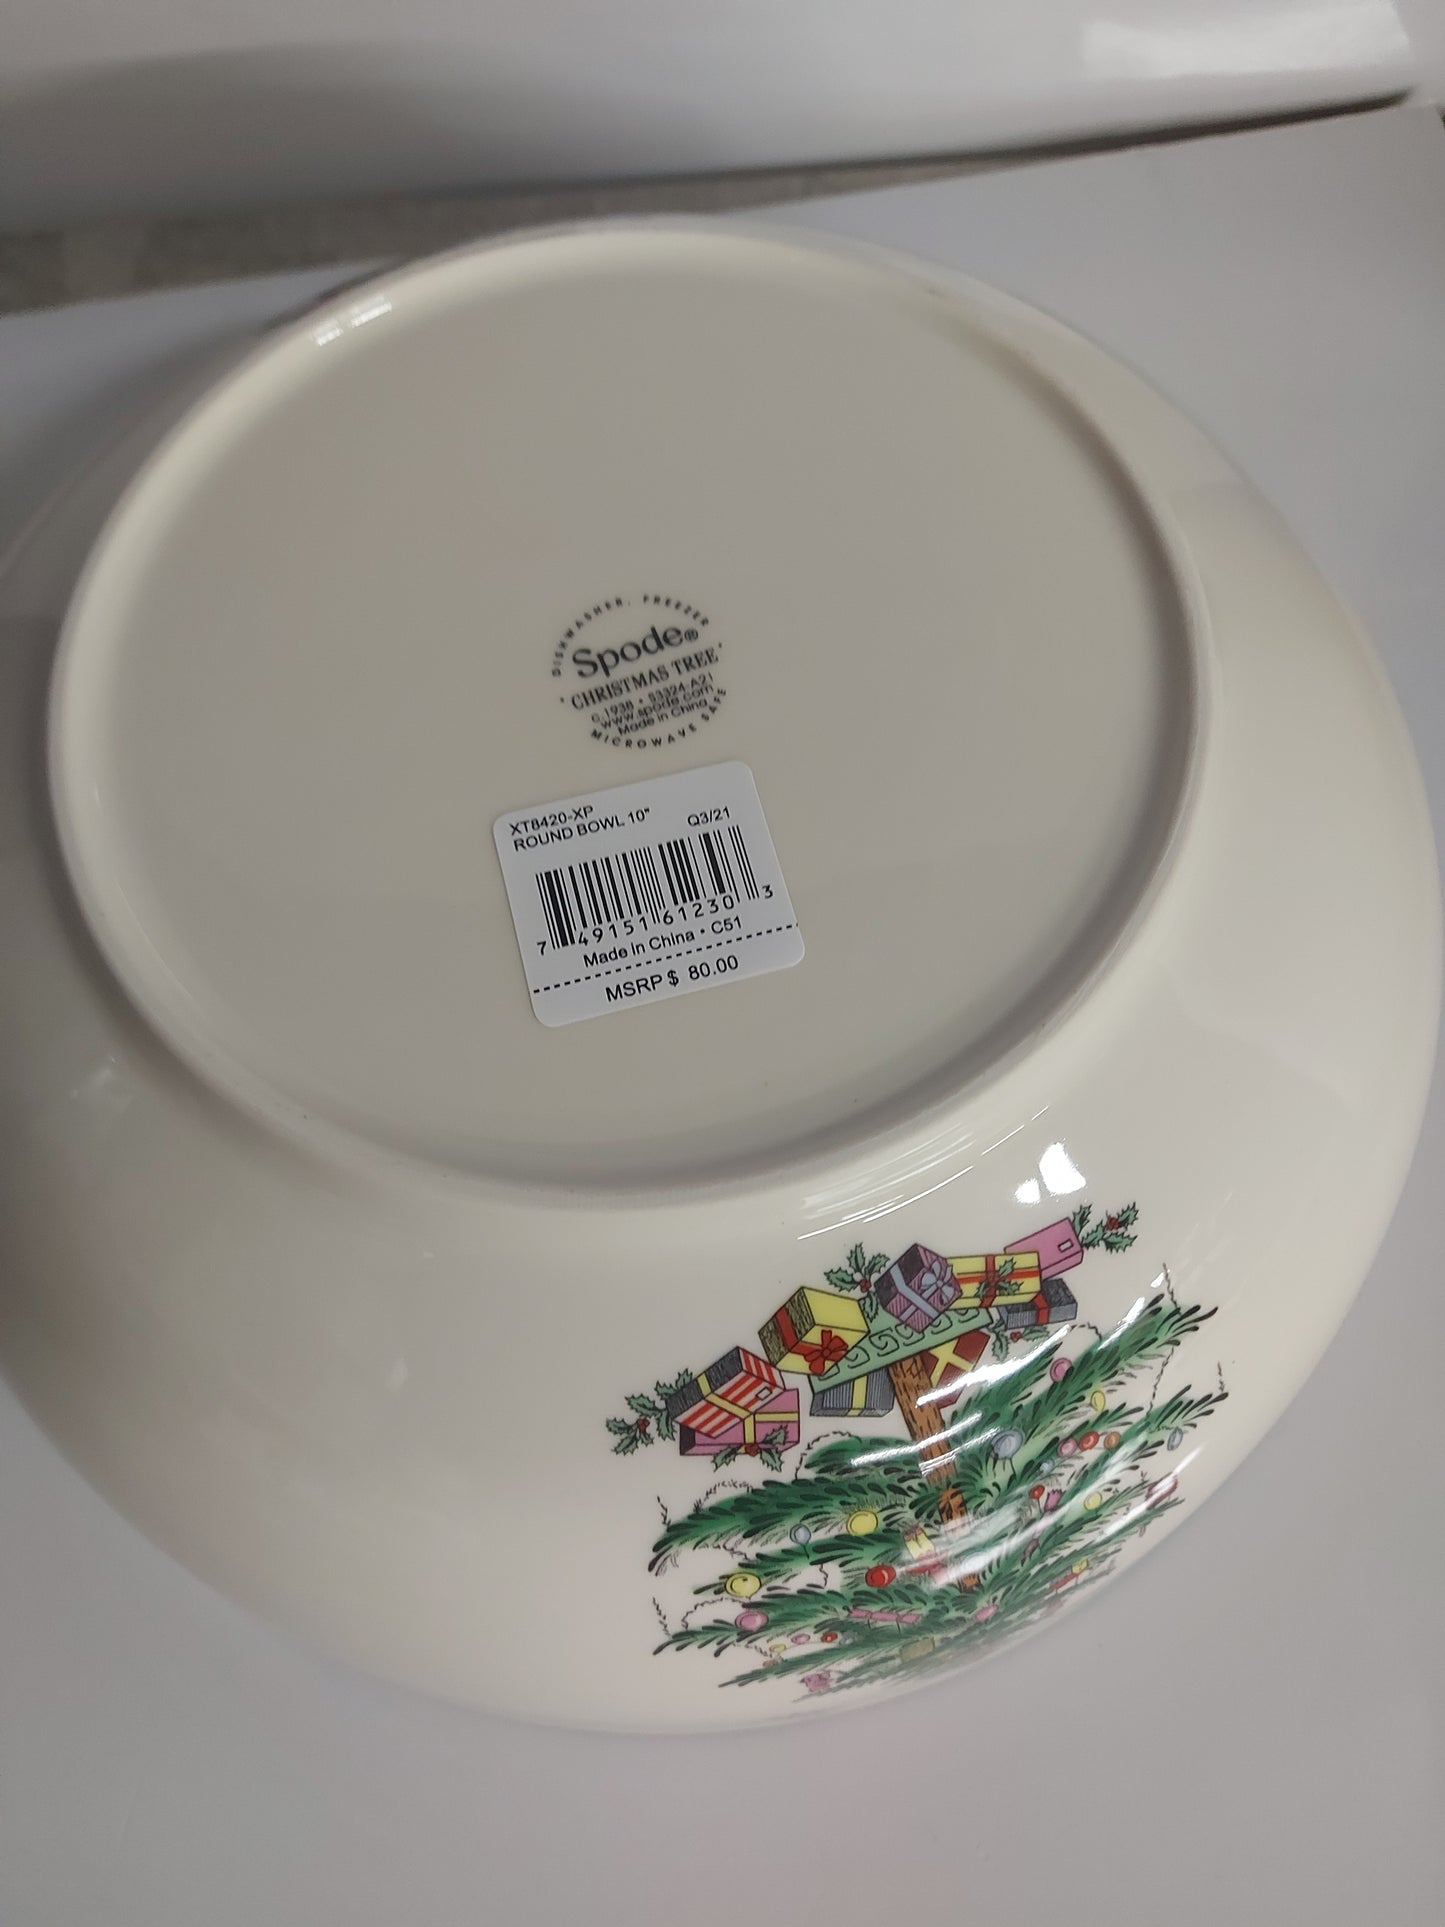 Spode Christmas Tree Round 10inch Bowl- price cut!!